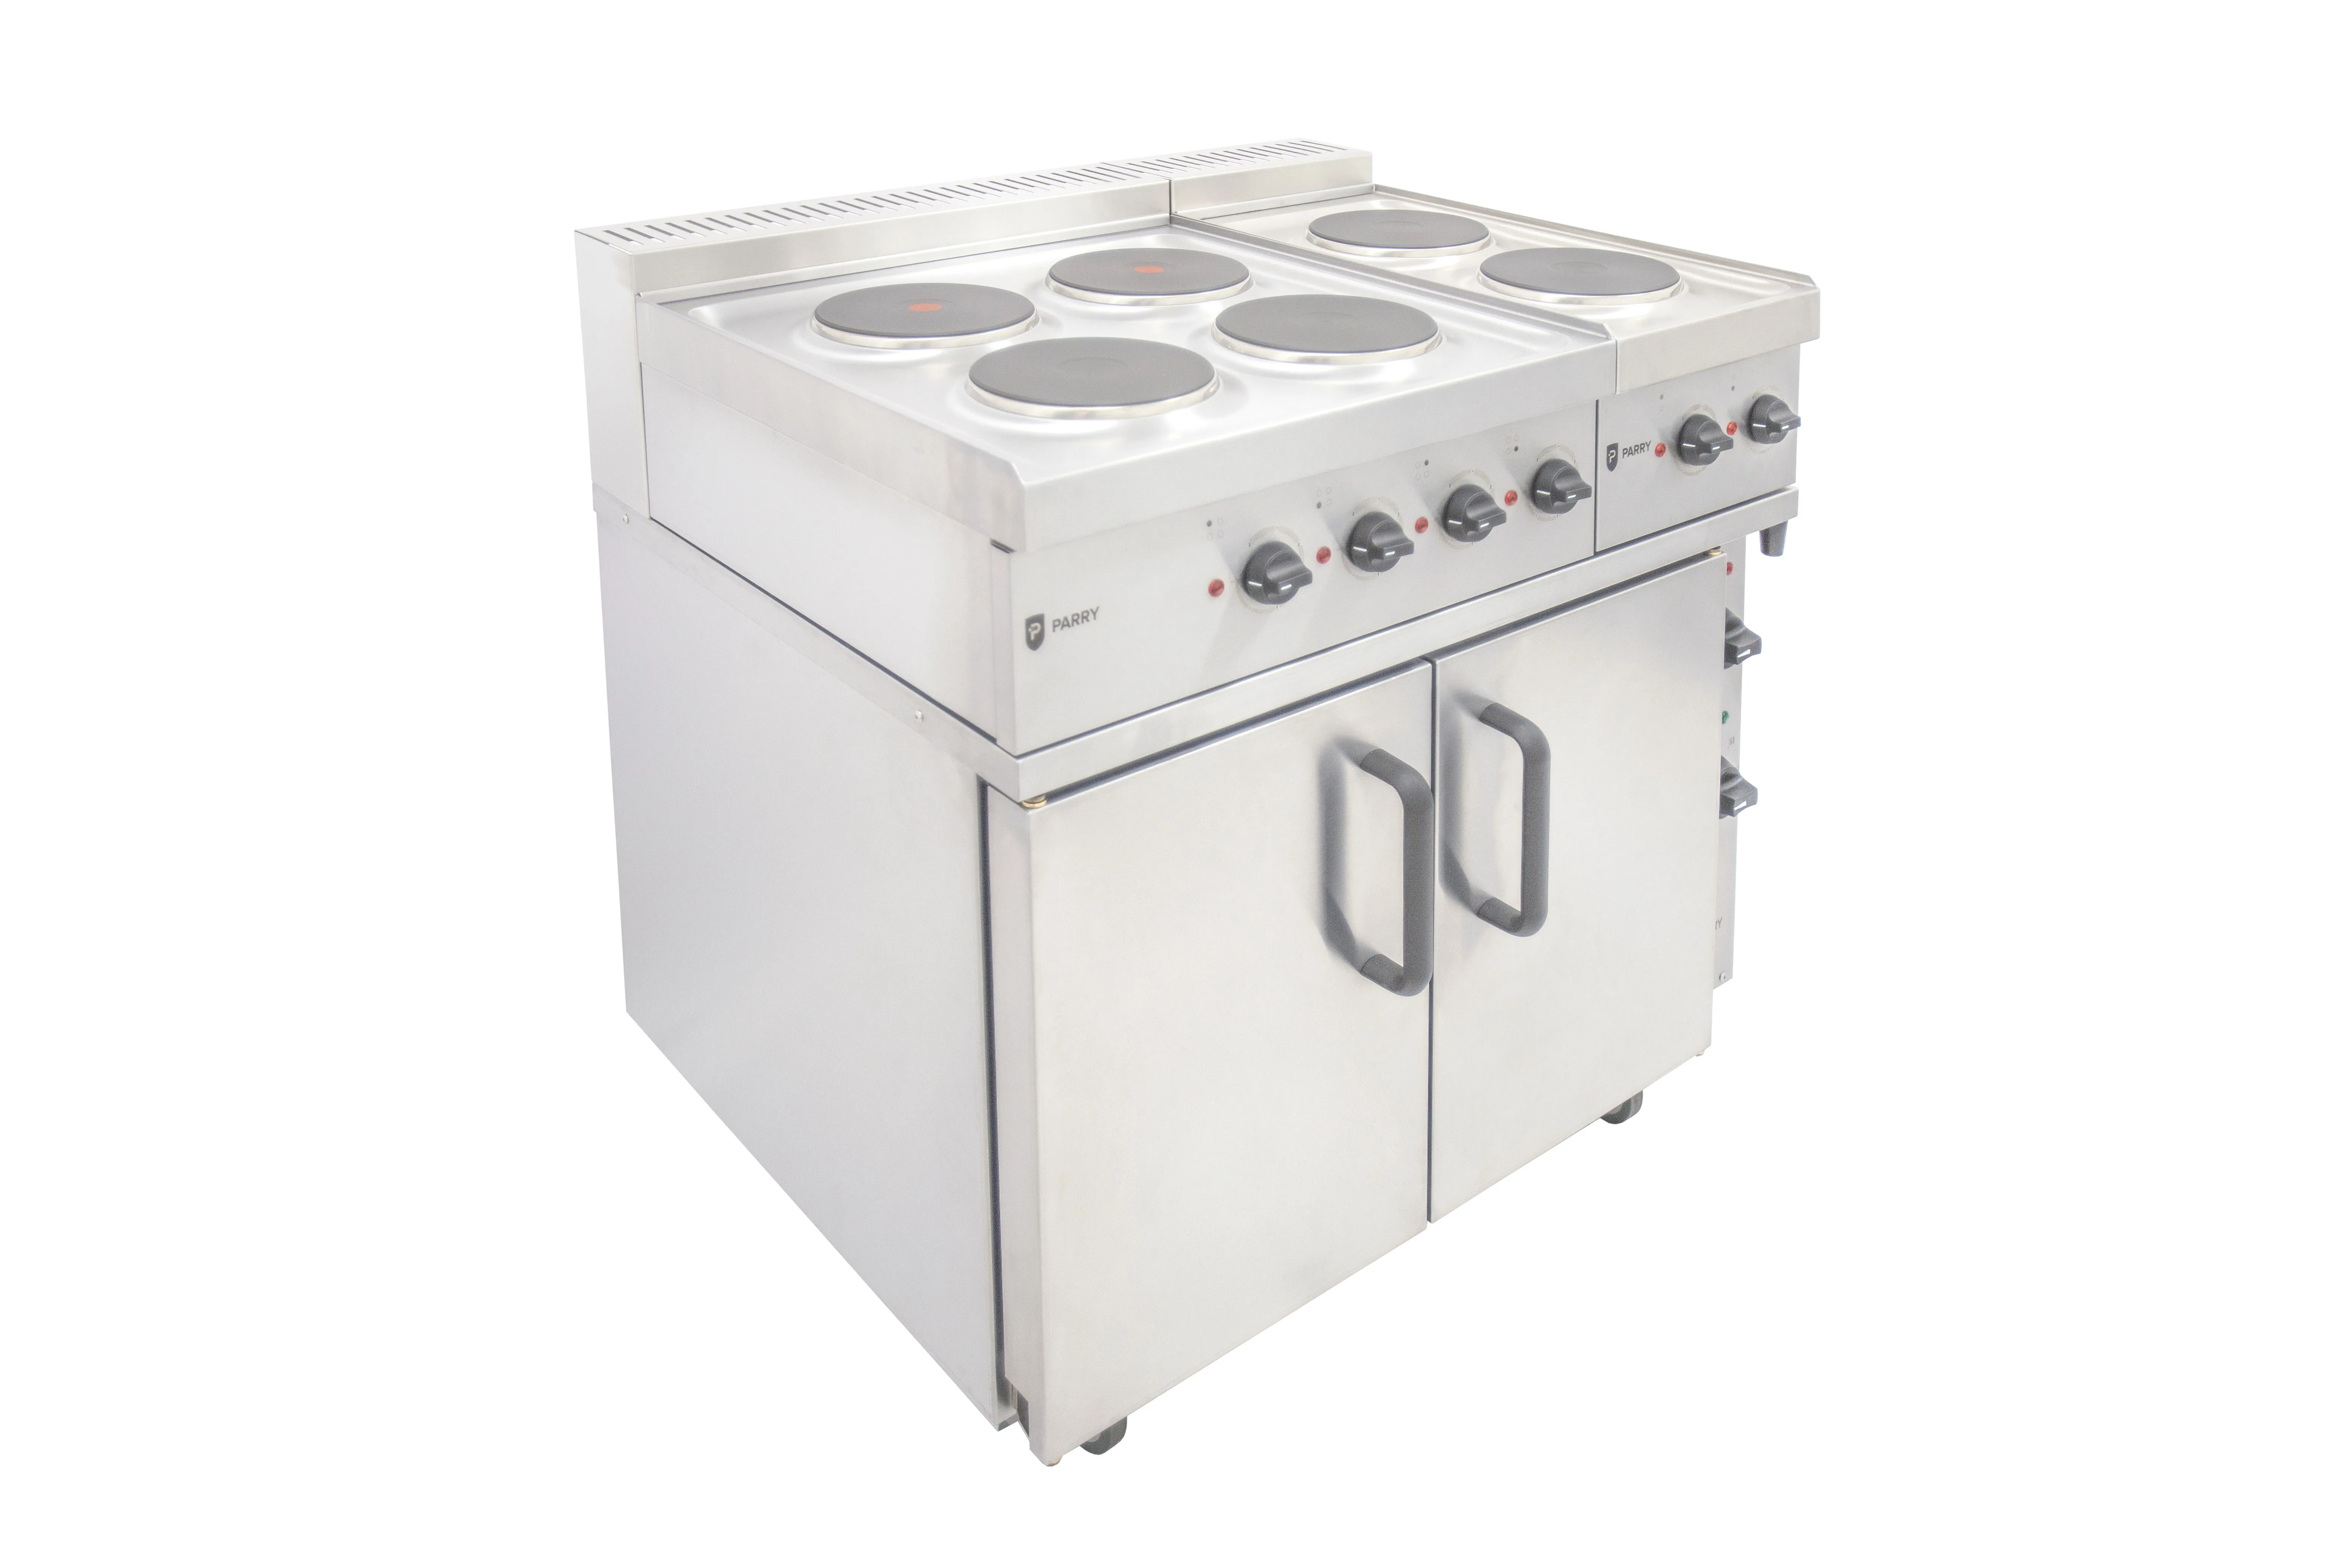 Parry P9EO18701871 - P9EO Electric Oven With N1871 4 Hobtop And N1870 2 Hob Top